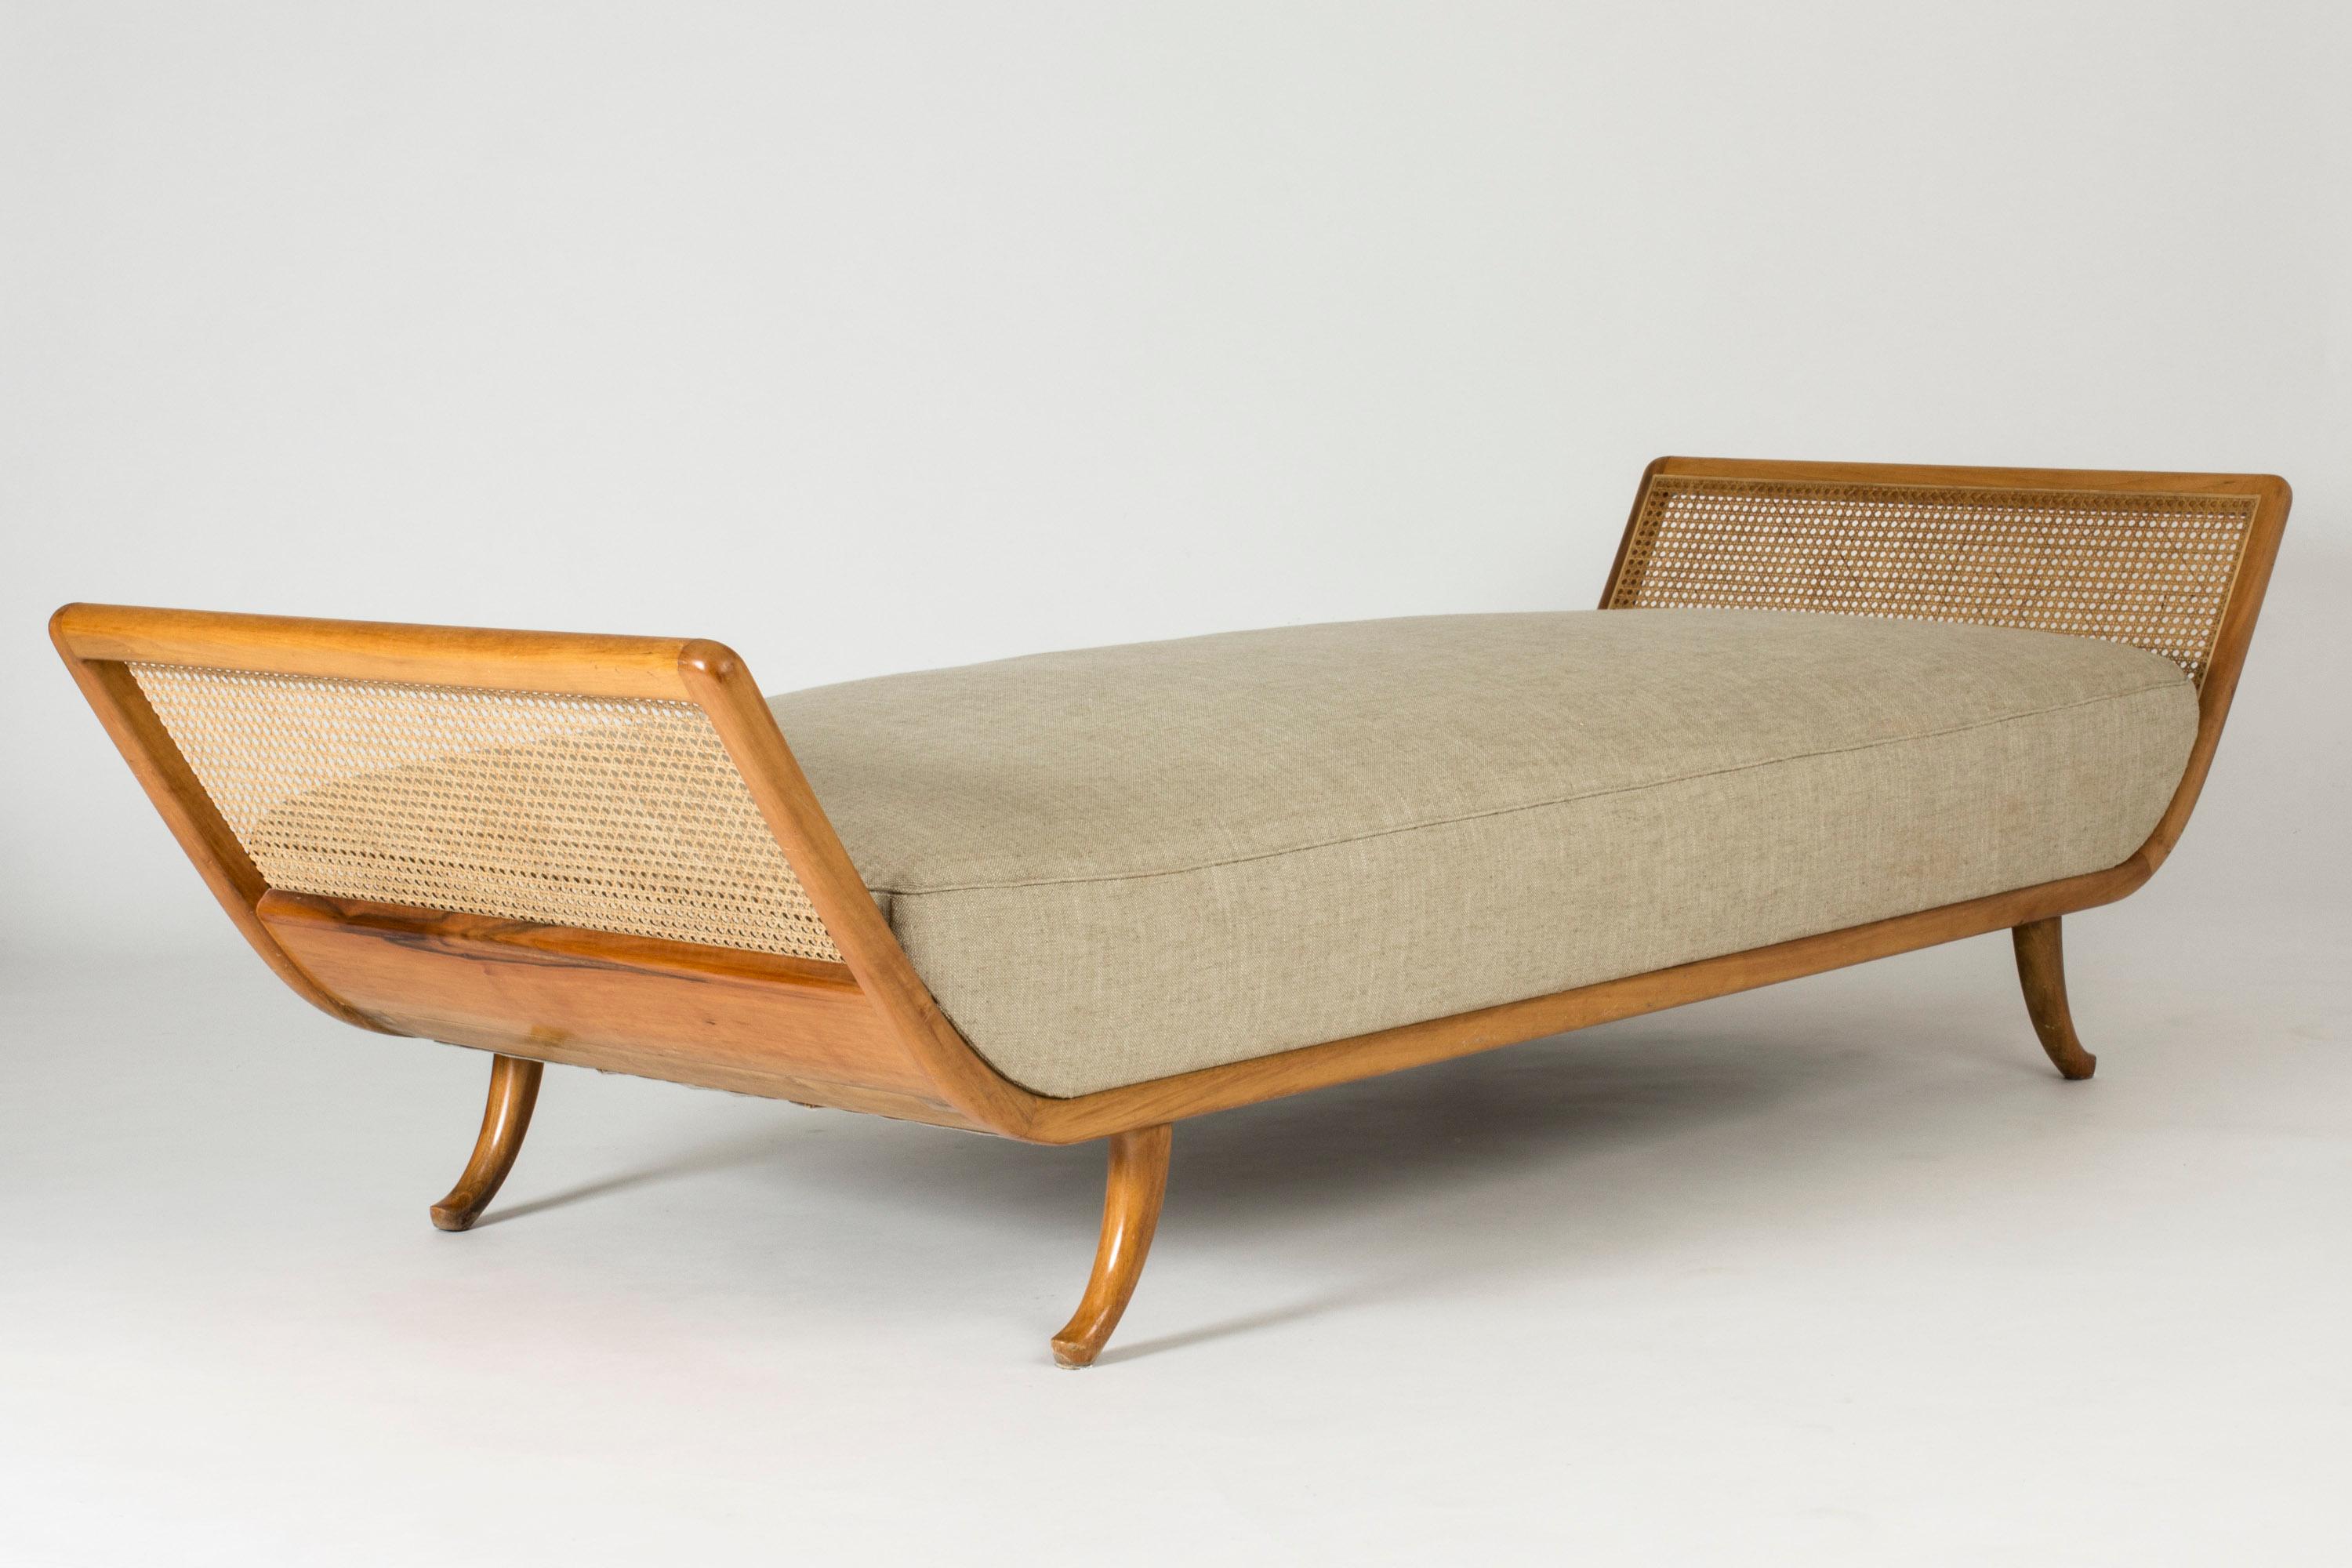 Beautiful Swedish Modern mahogany daybed with rattan on the sides. Lovely open silhouette, clean line of the base of the bed continuing up to the sloping short sides. Seat with springs, upholstered with linen fabric.